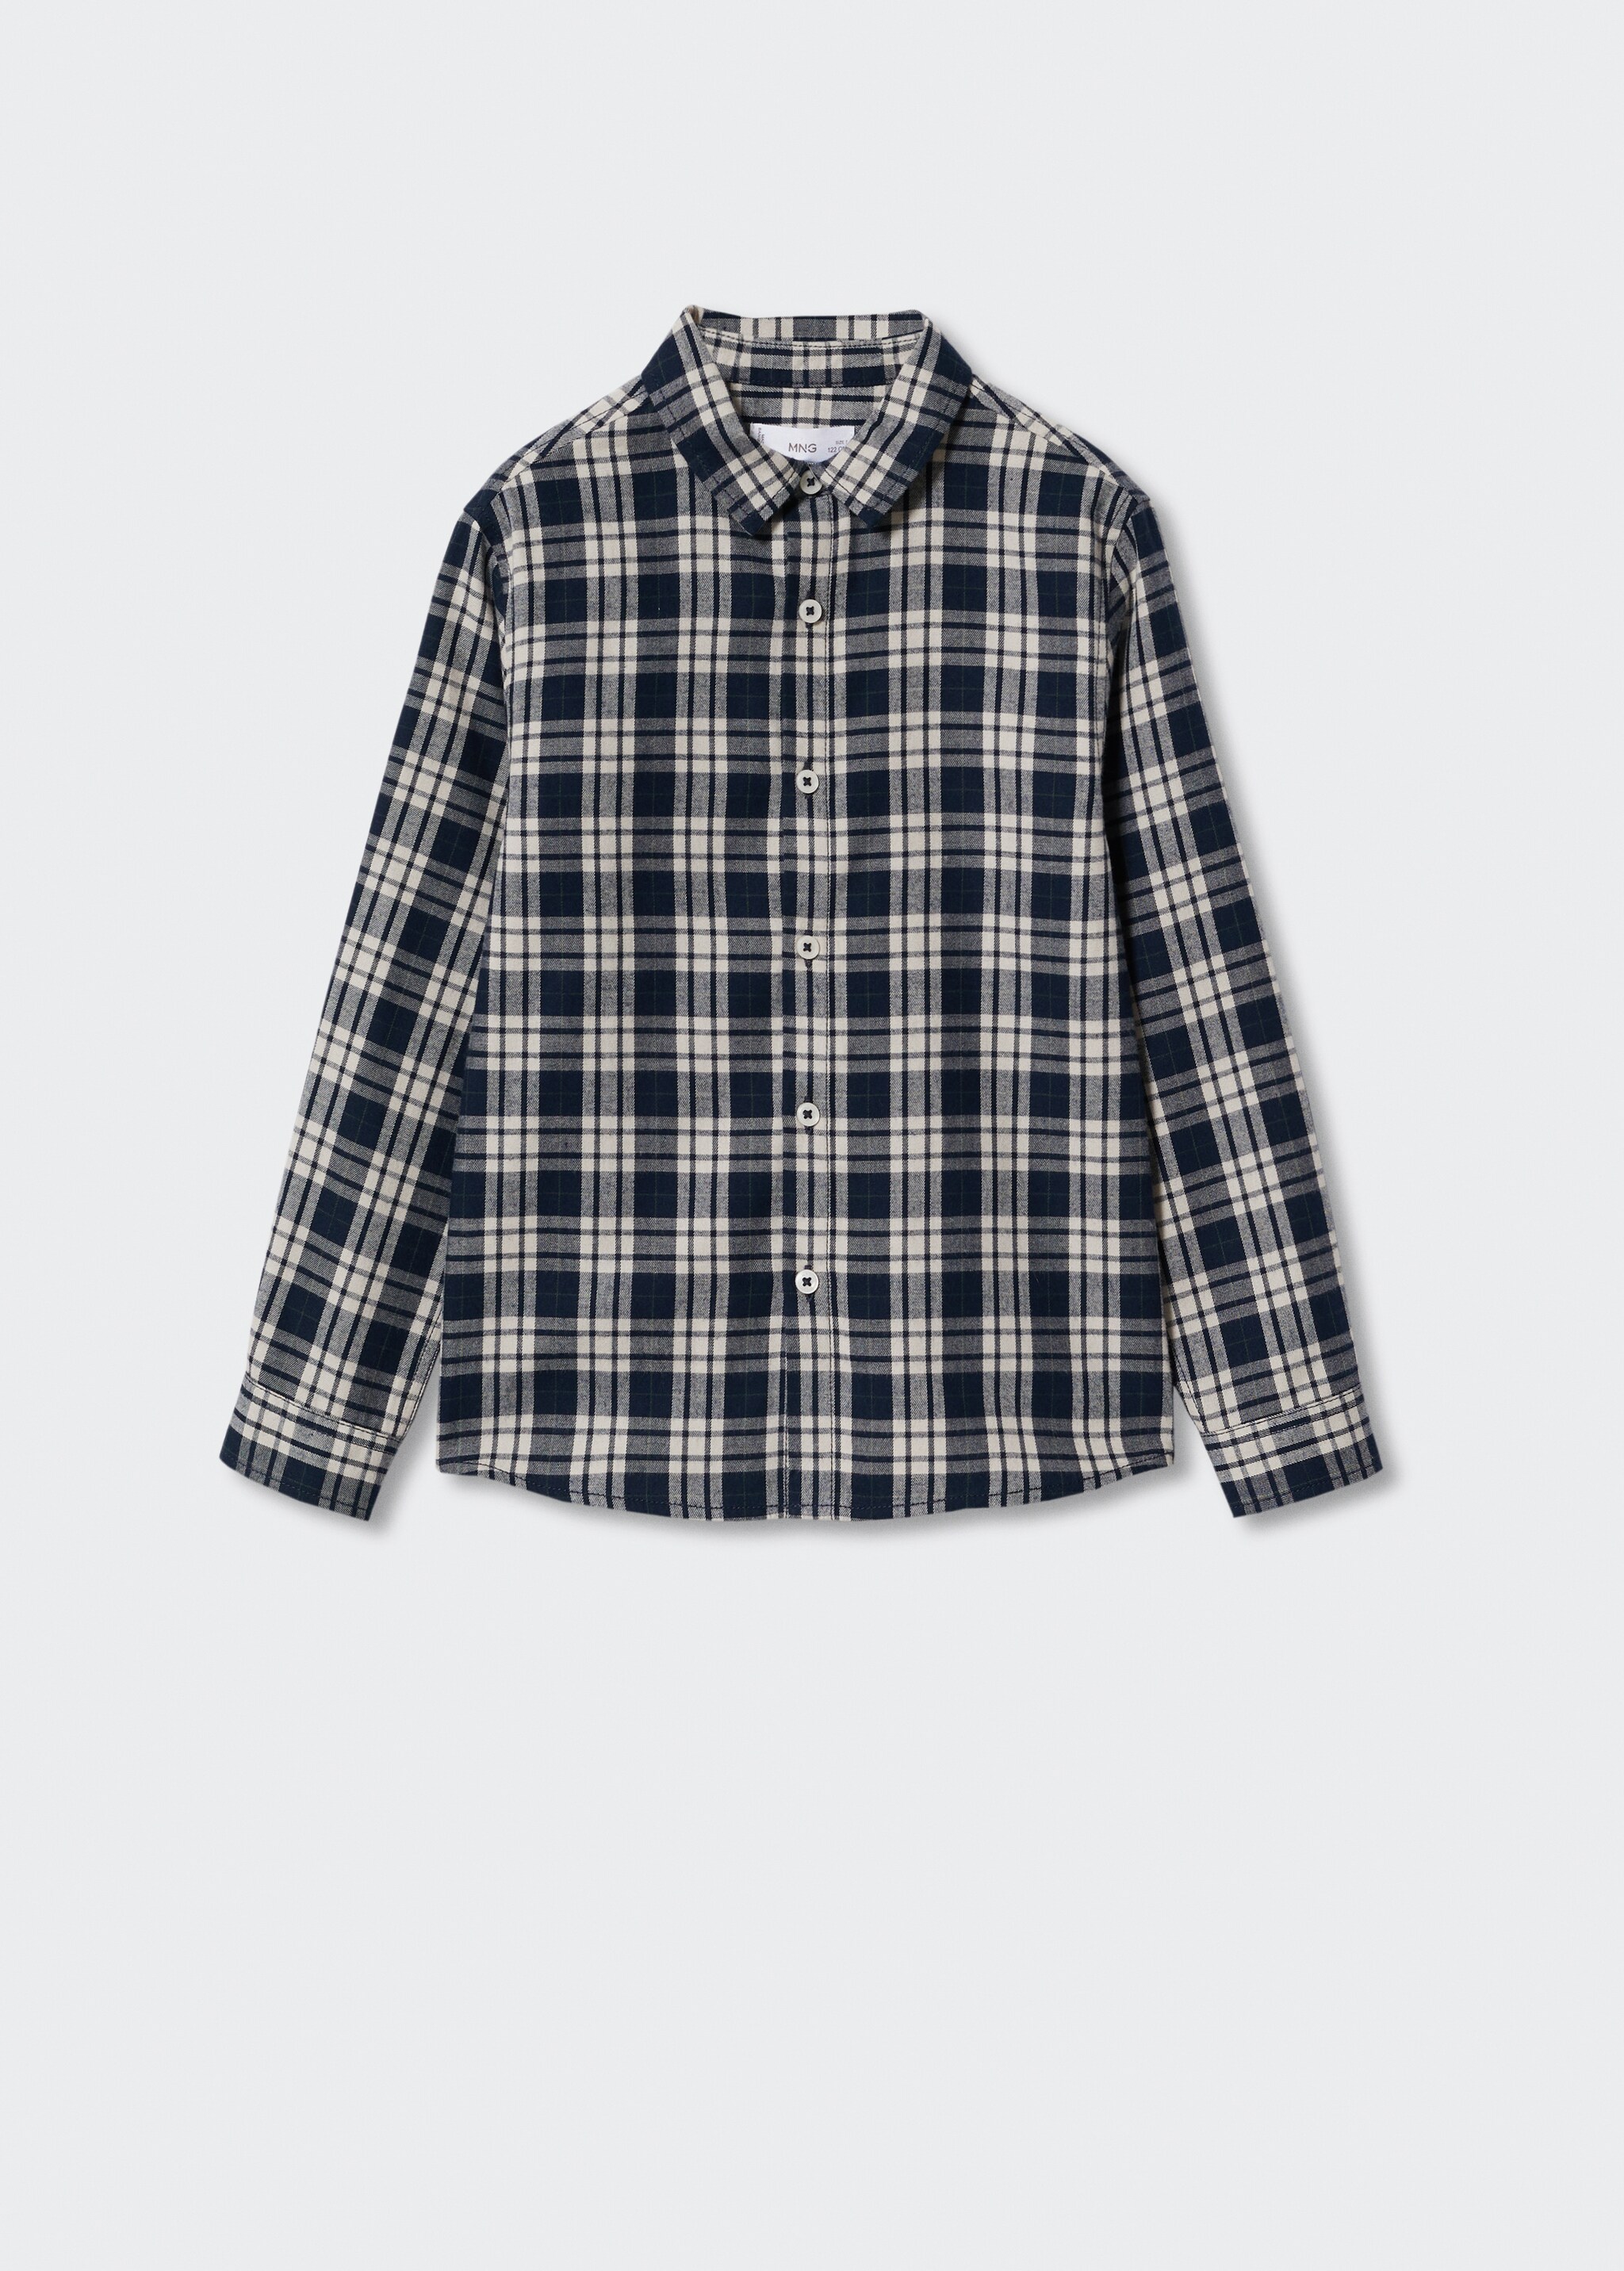 Check cotton shirt - Article without model